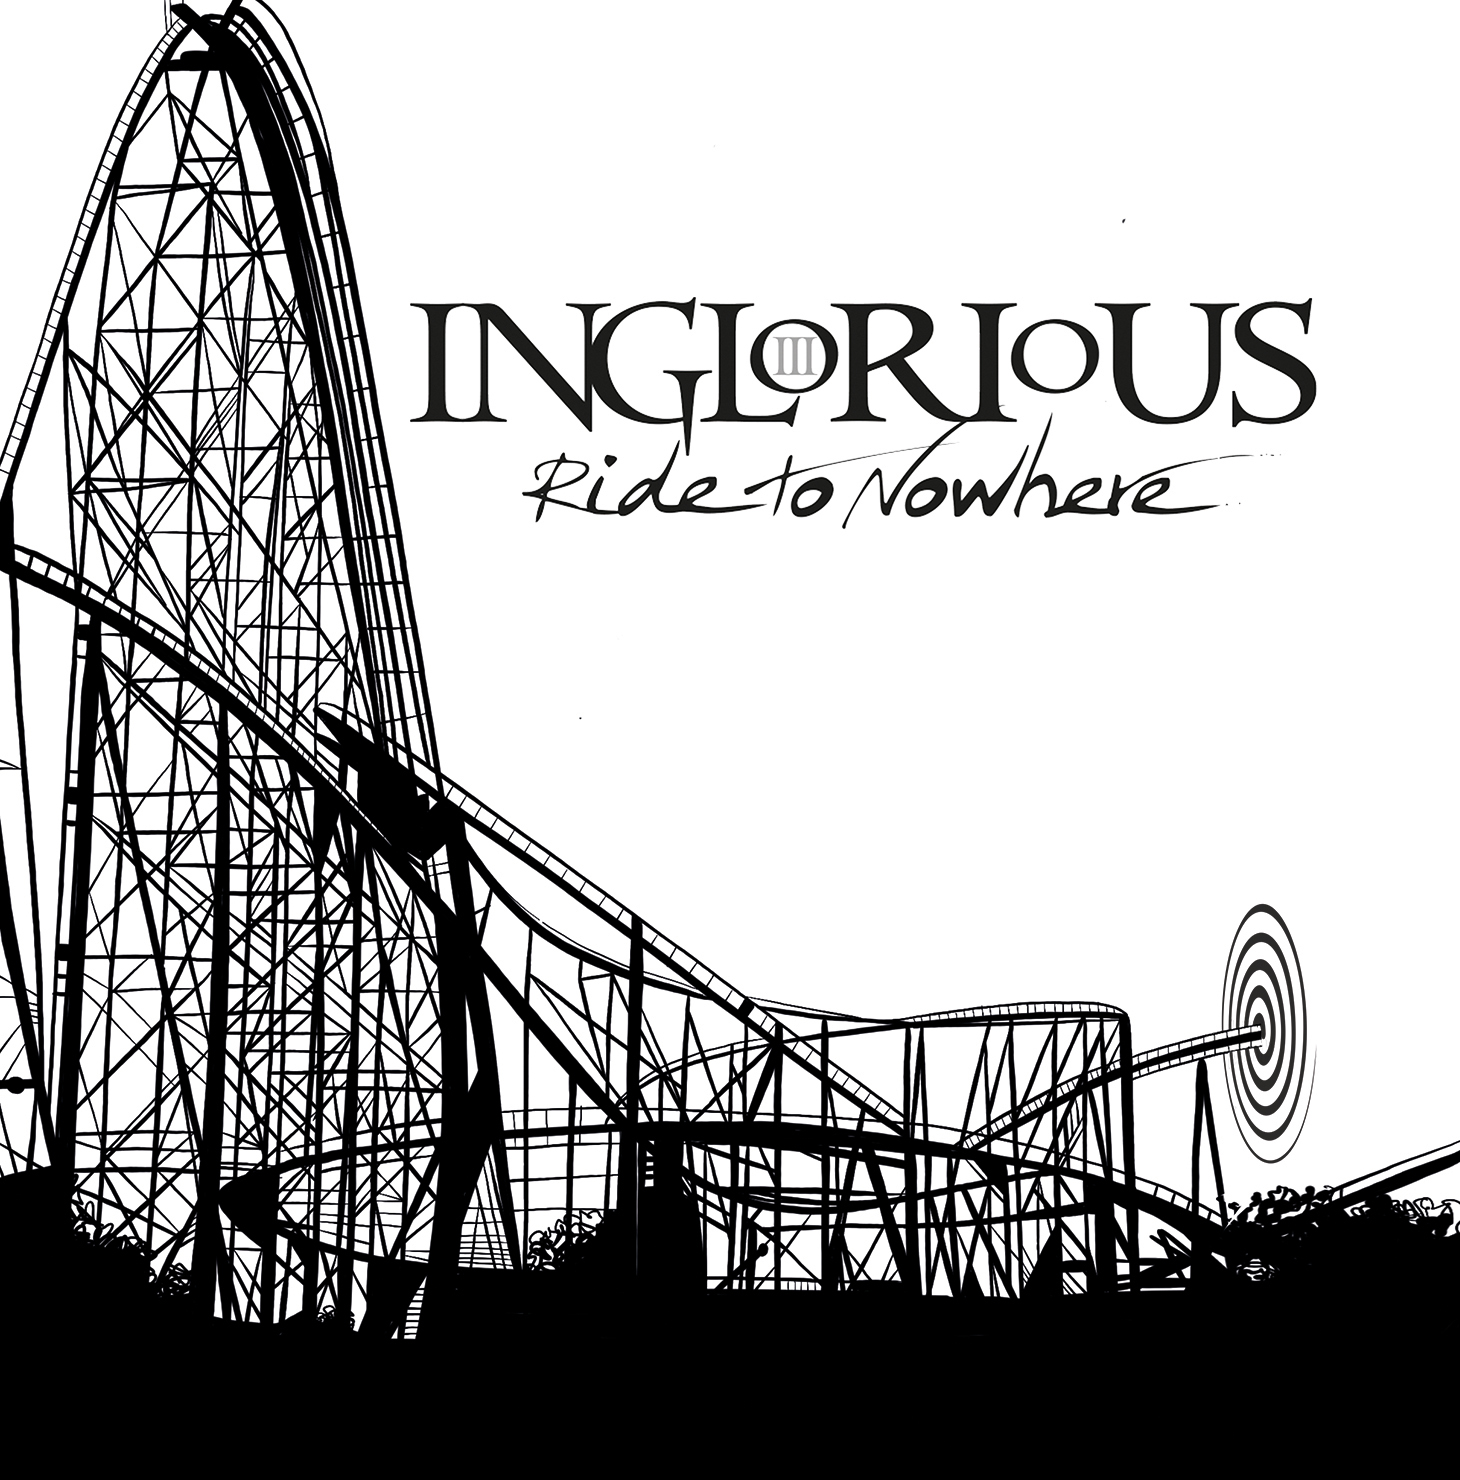 Inglorious - Ride To Nowhere - CD